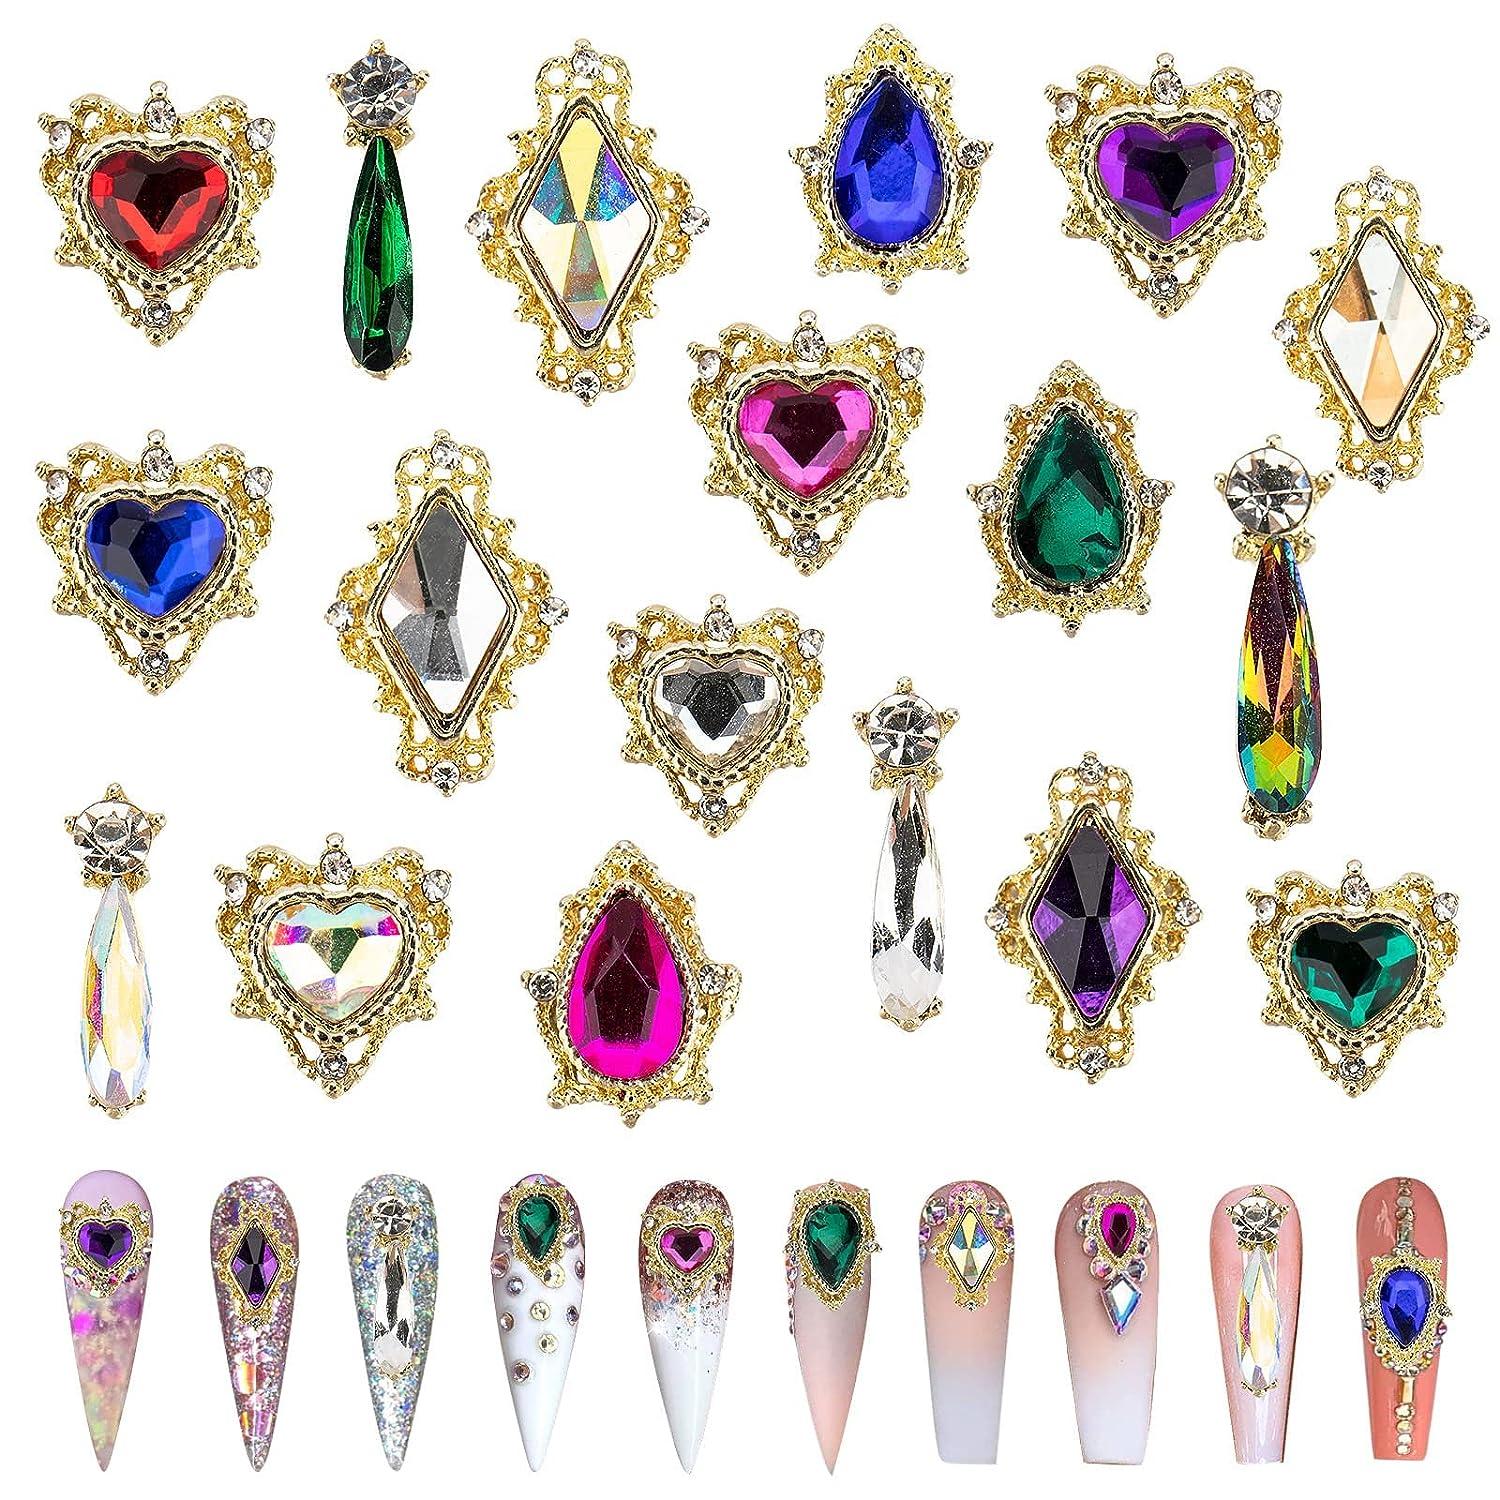 JIEPING 54PCS Nail Art Rhinestones 3D Nail Charms Gems Decorations Big AB  Iridescent Crystal Jewels Gold Chrome Metal Alloy Hearts Drops Charm for  DIY Multiple shapes colorful gem